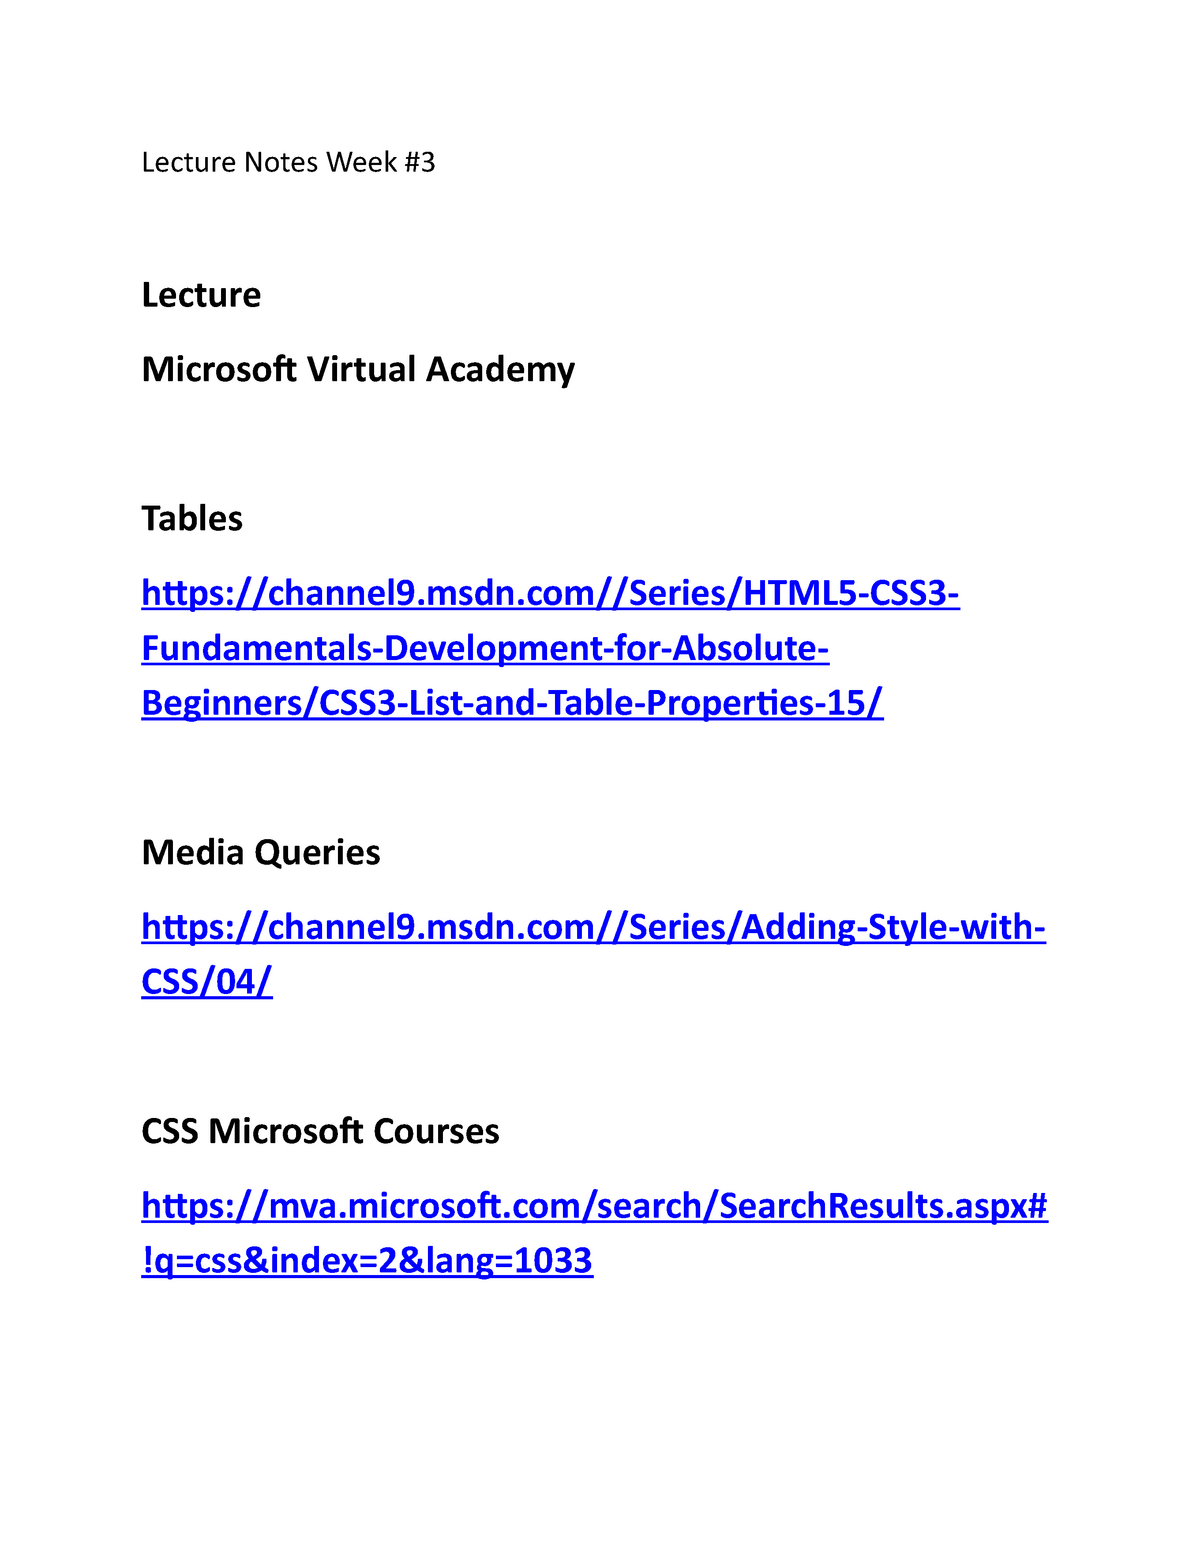 Lecture Notes Week 3 Msdnserieshtml5 Css3 Fundamentals Development For Absolute Beginners 0390